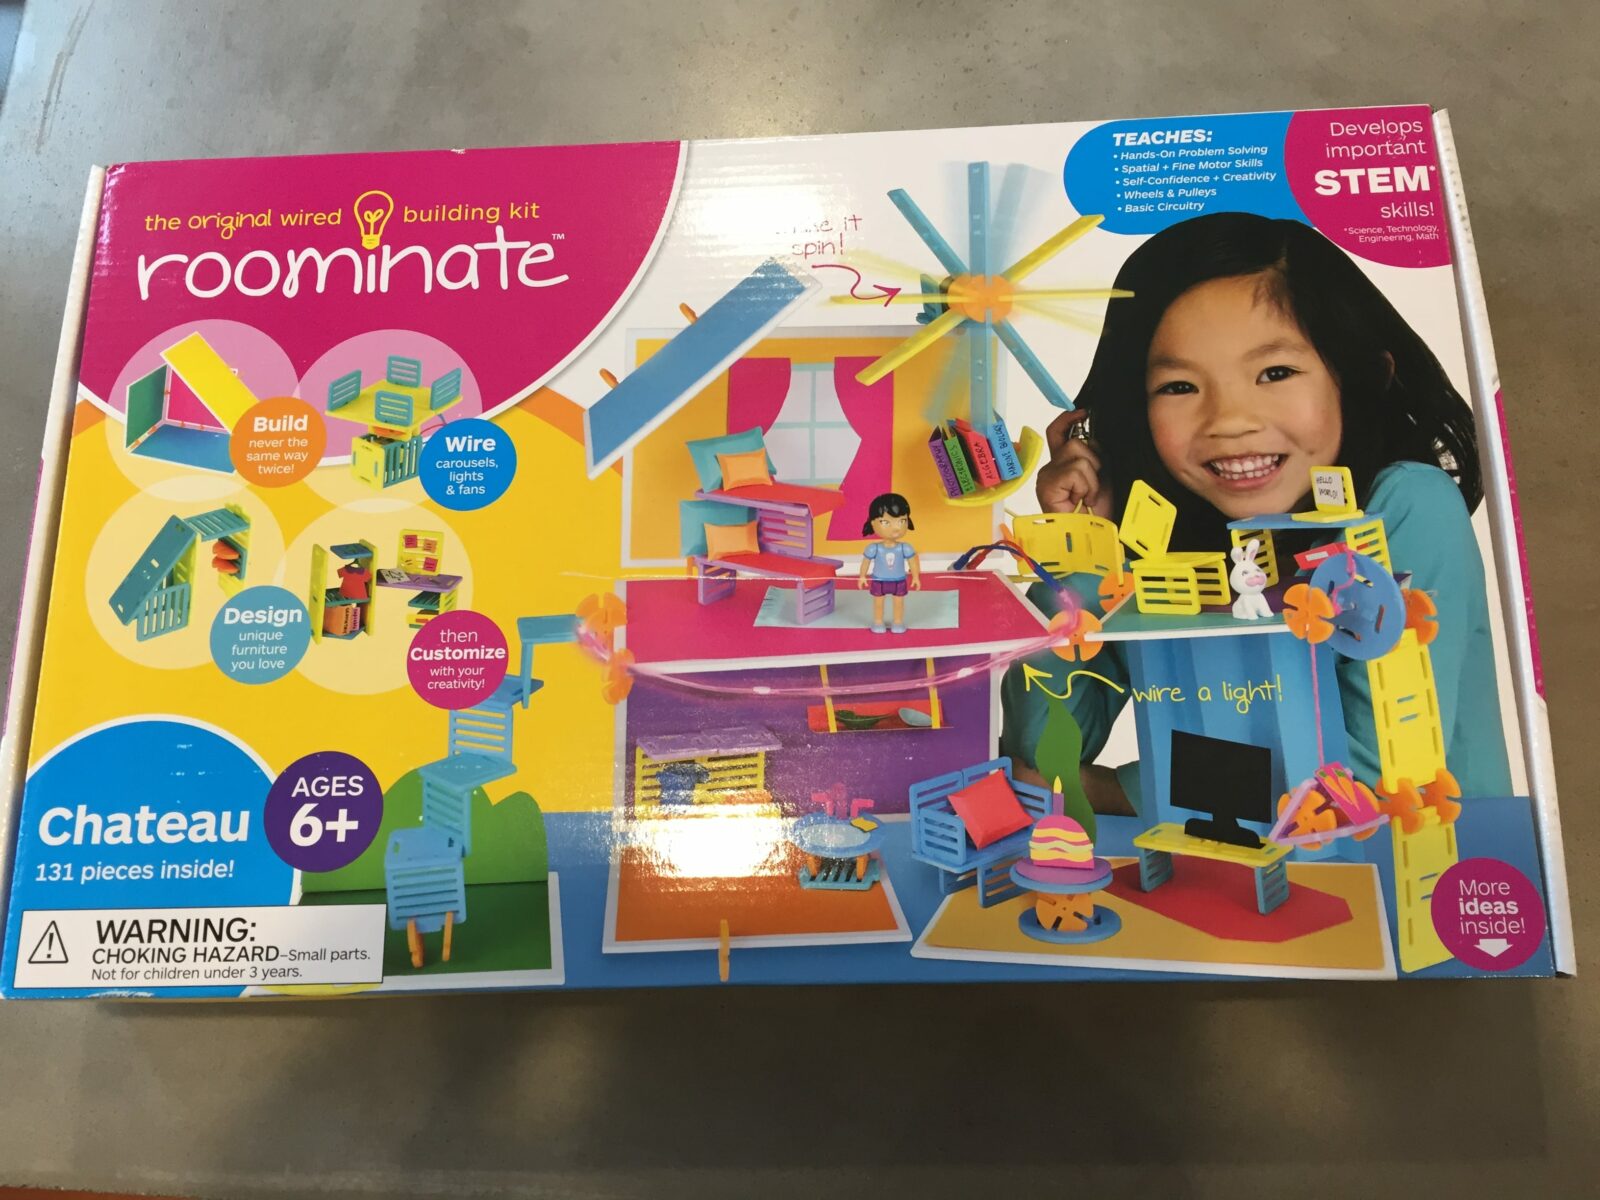 construction sets for girls